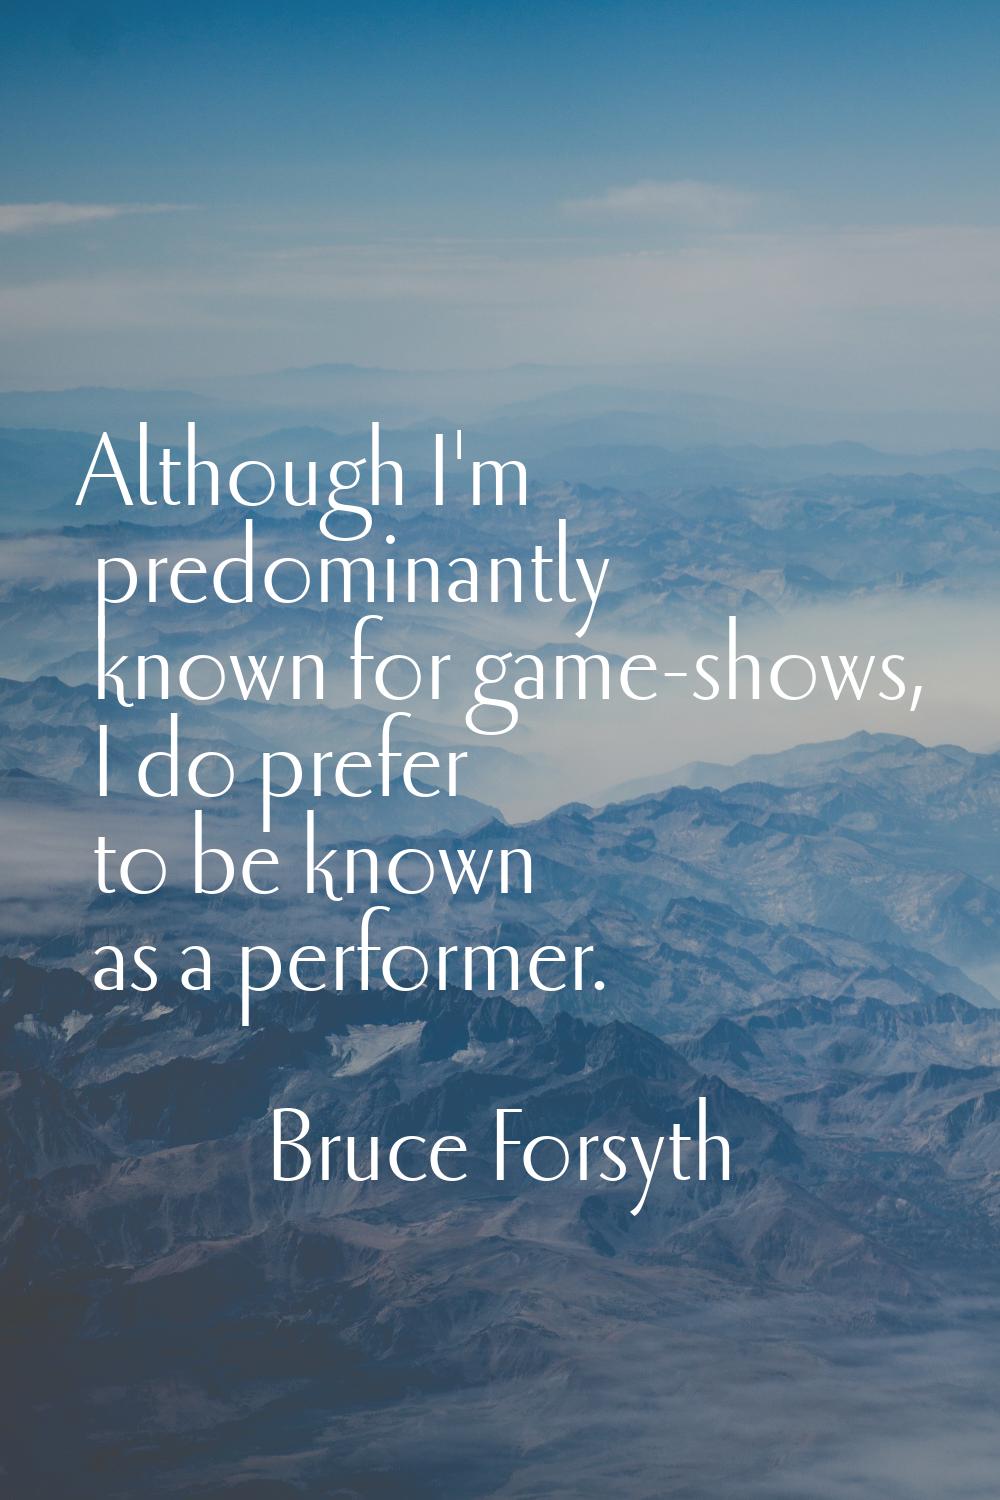 Although I'm predominantly known for game-shows, I do prefer to be known as a performer.